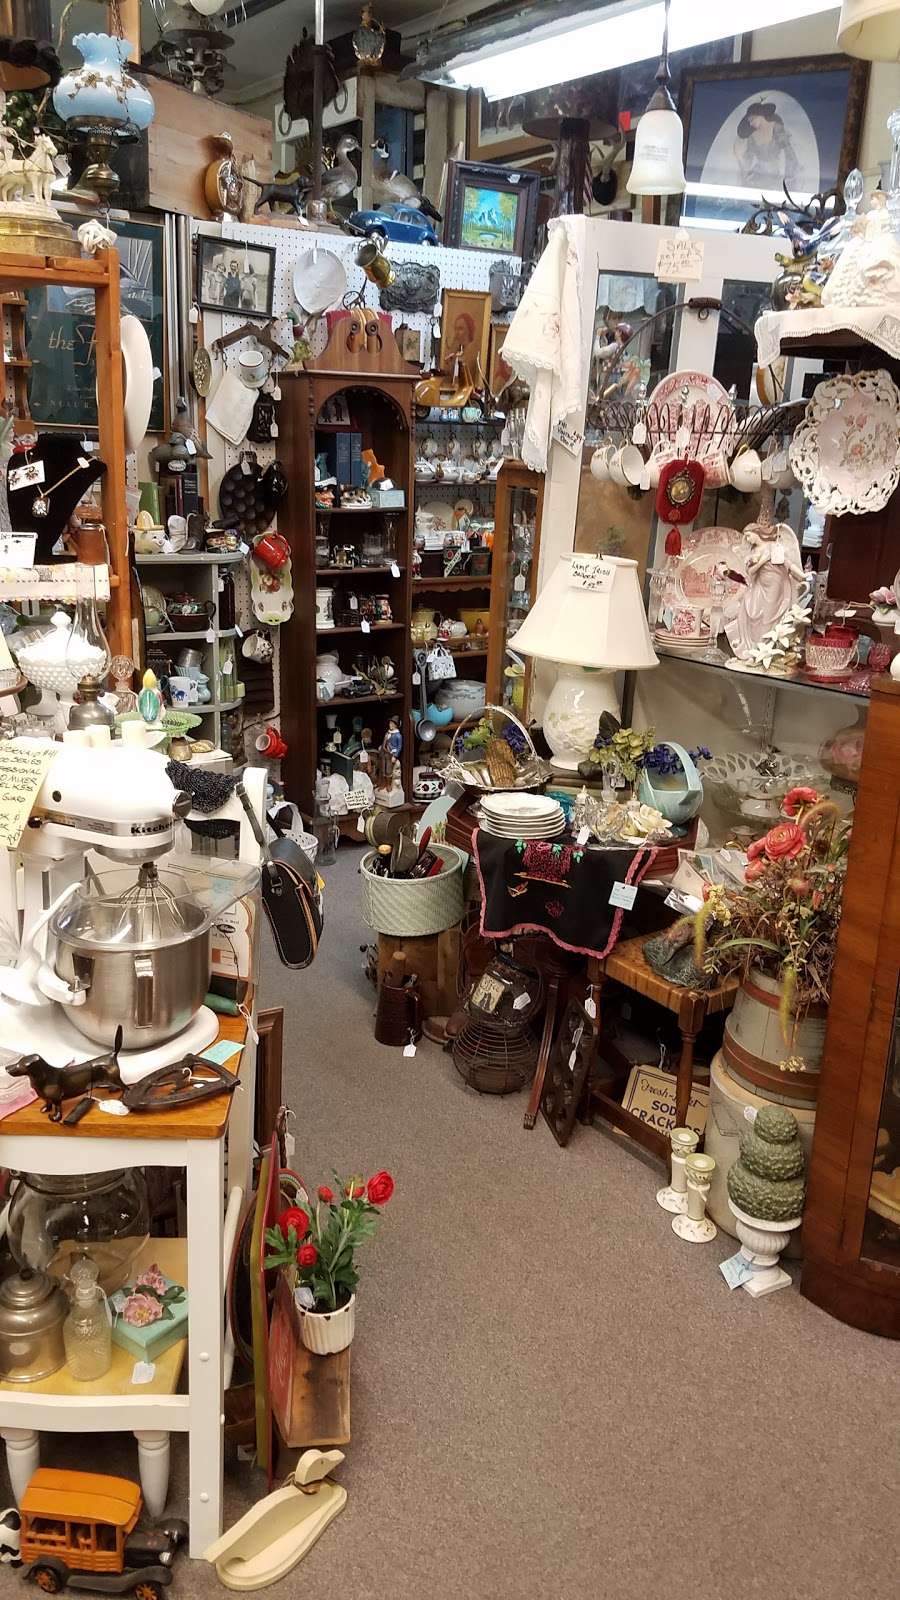 One Block West Antiques & Collectibles | 20 S Gold St, Paola, KS 66071, USA | Phone: (913) 294-8499